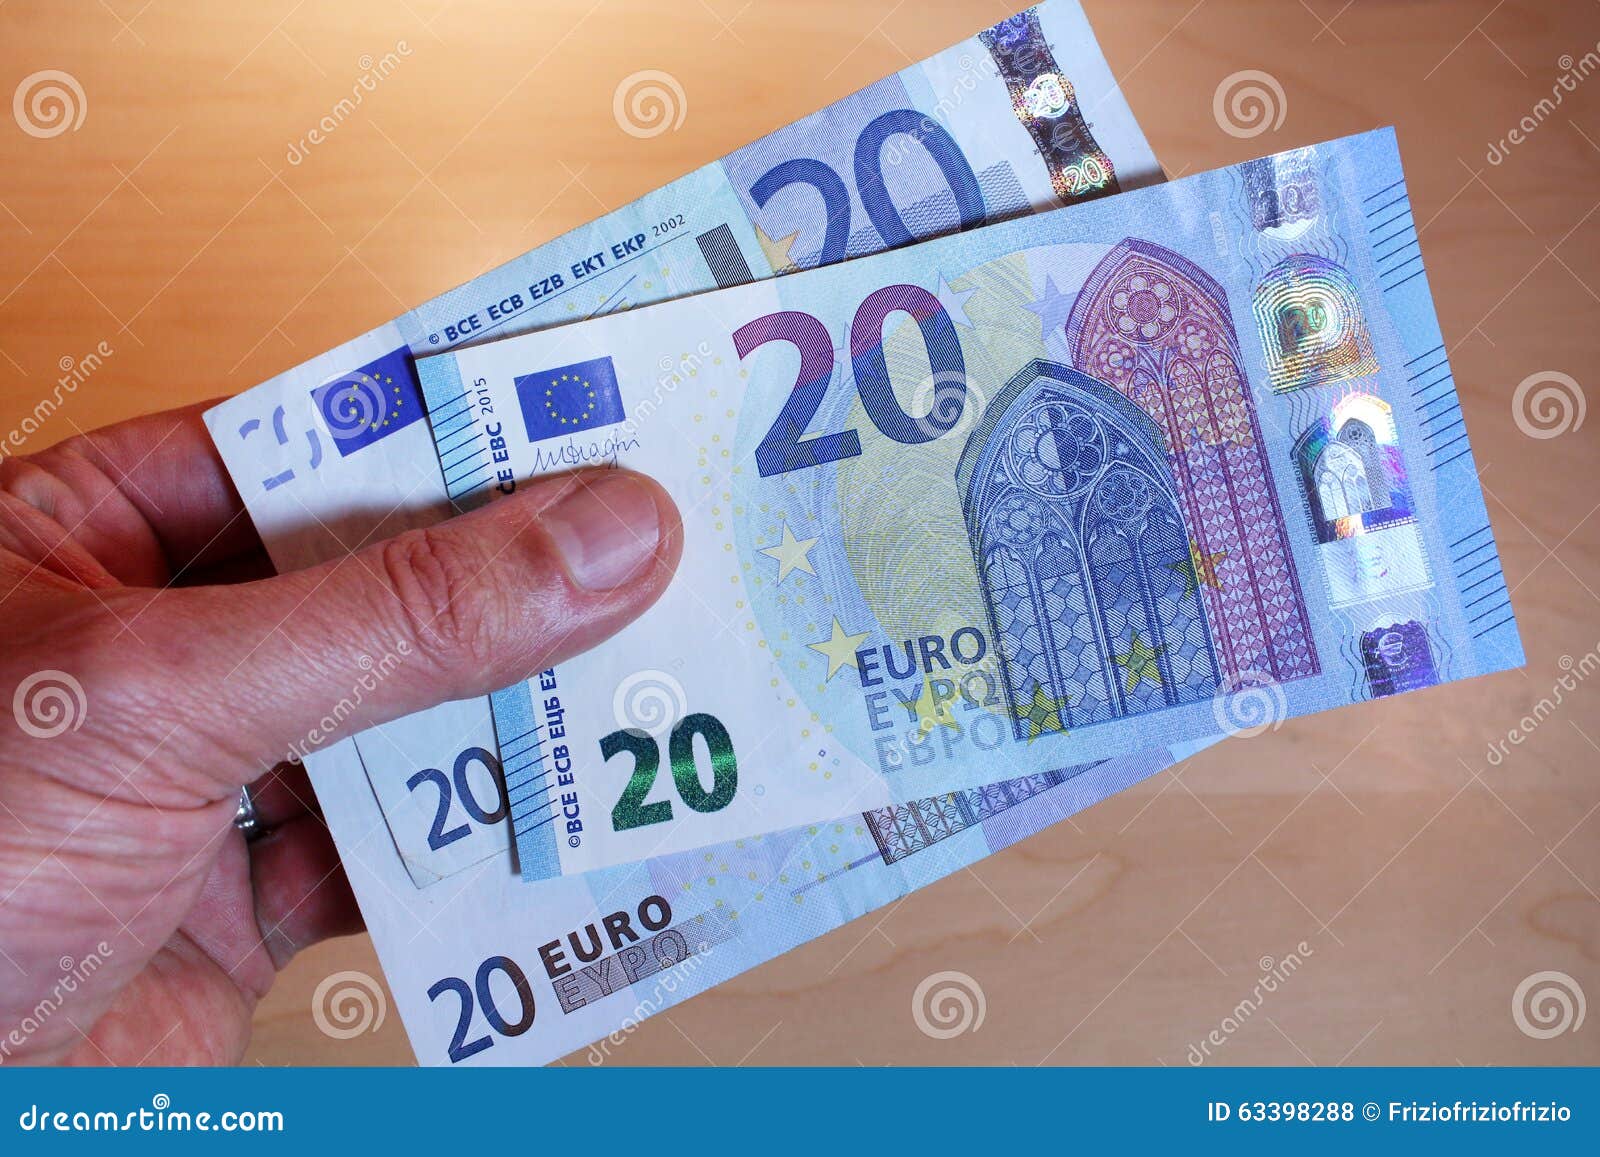 Euro Banknote New Design Stock Photo Image Of Central Currency 6339